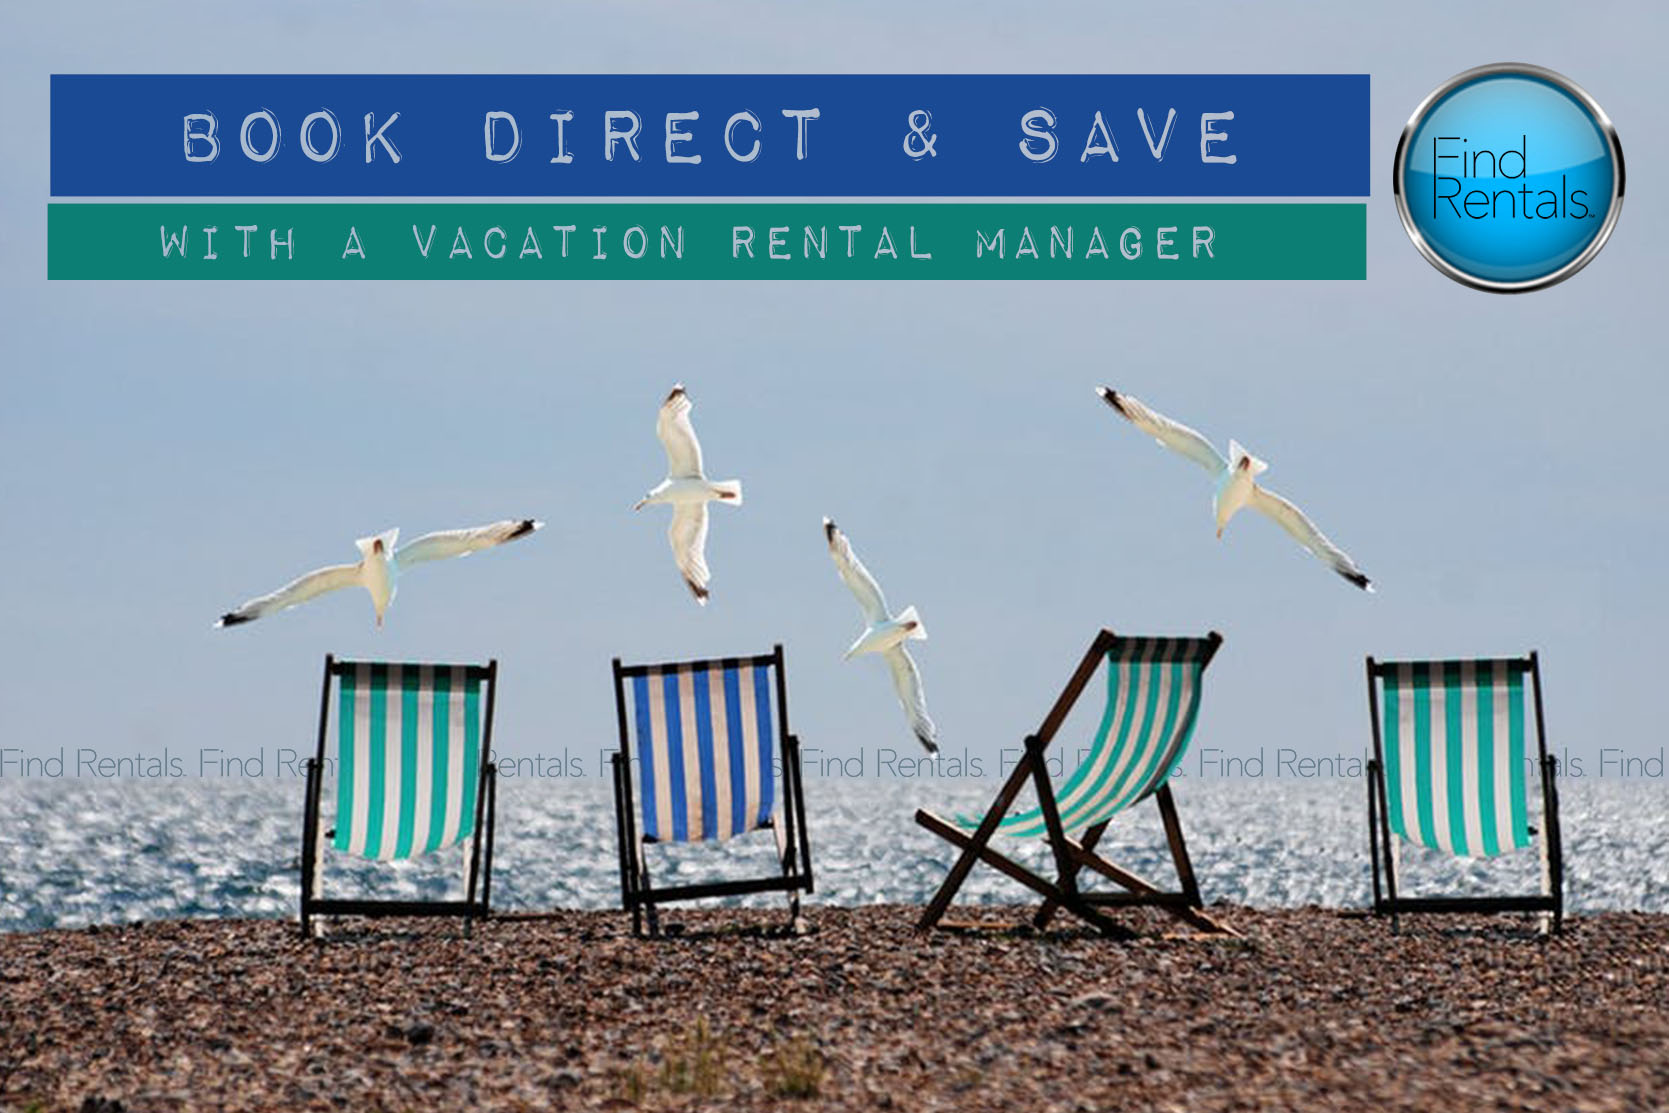 AMI vacation rental managers